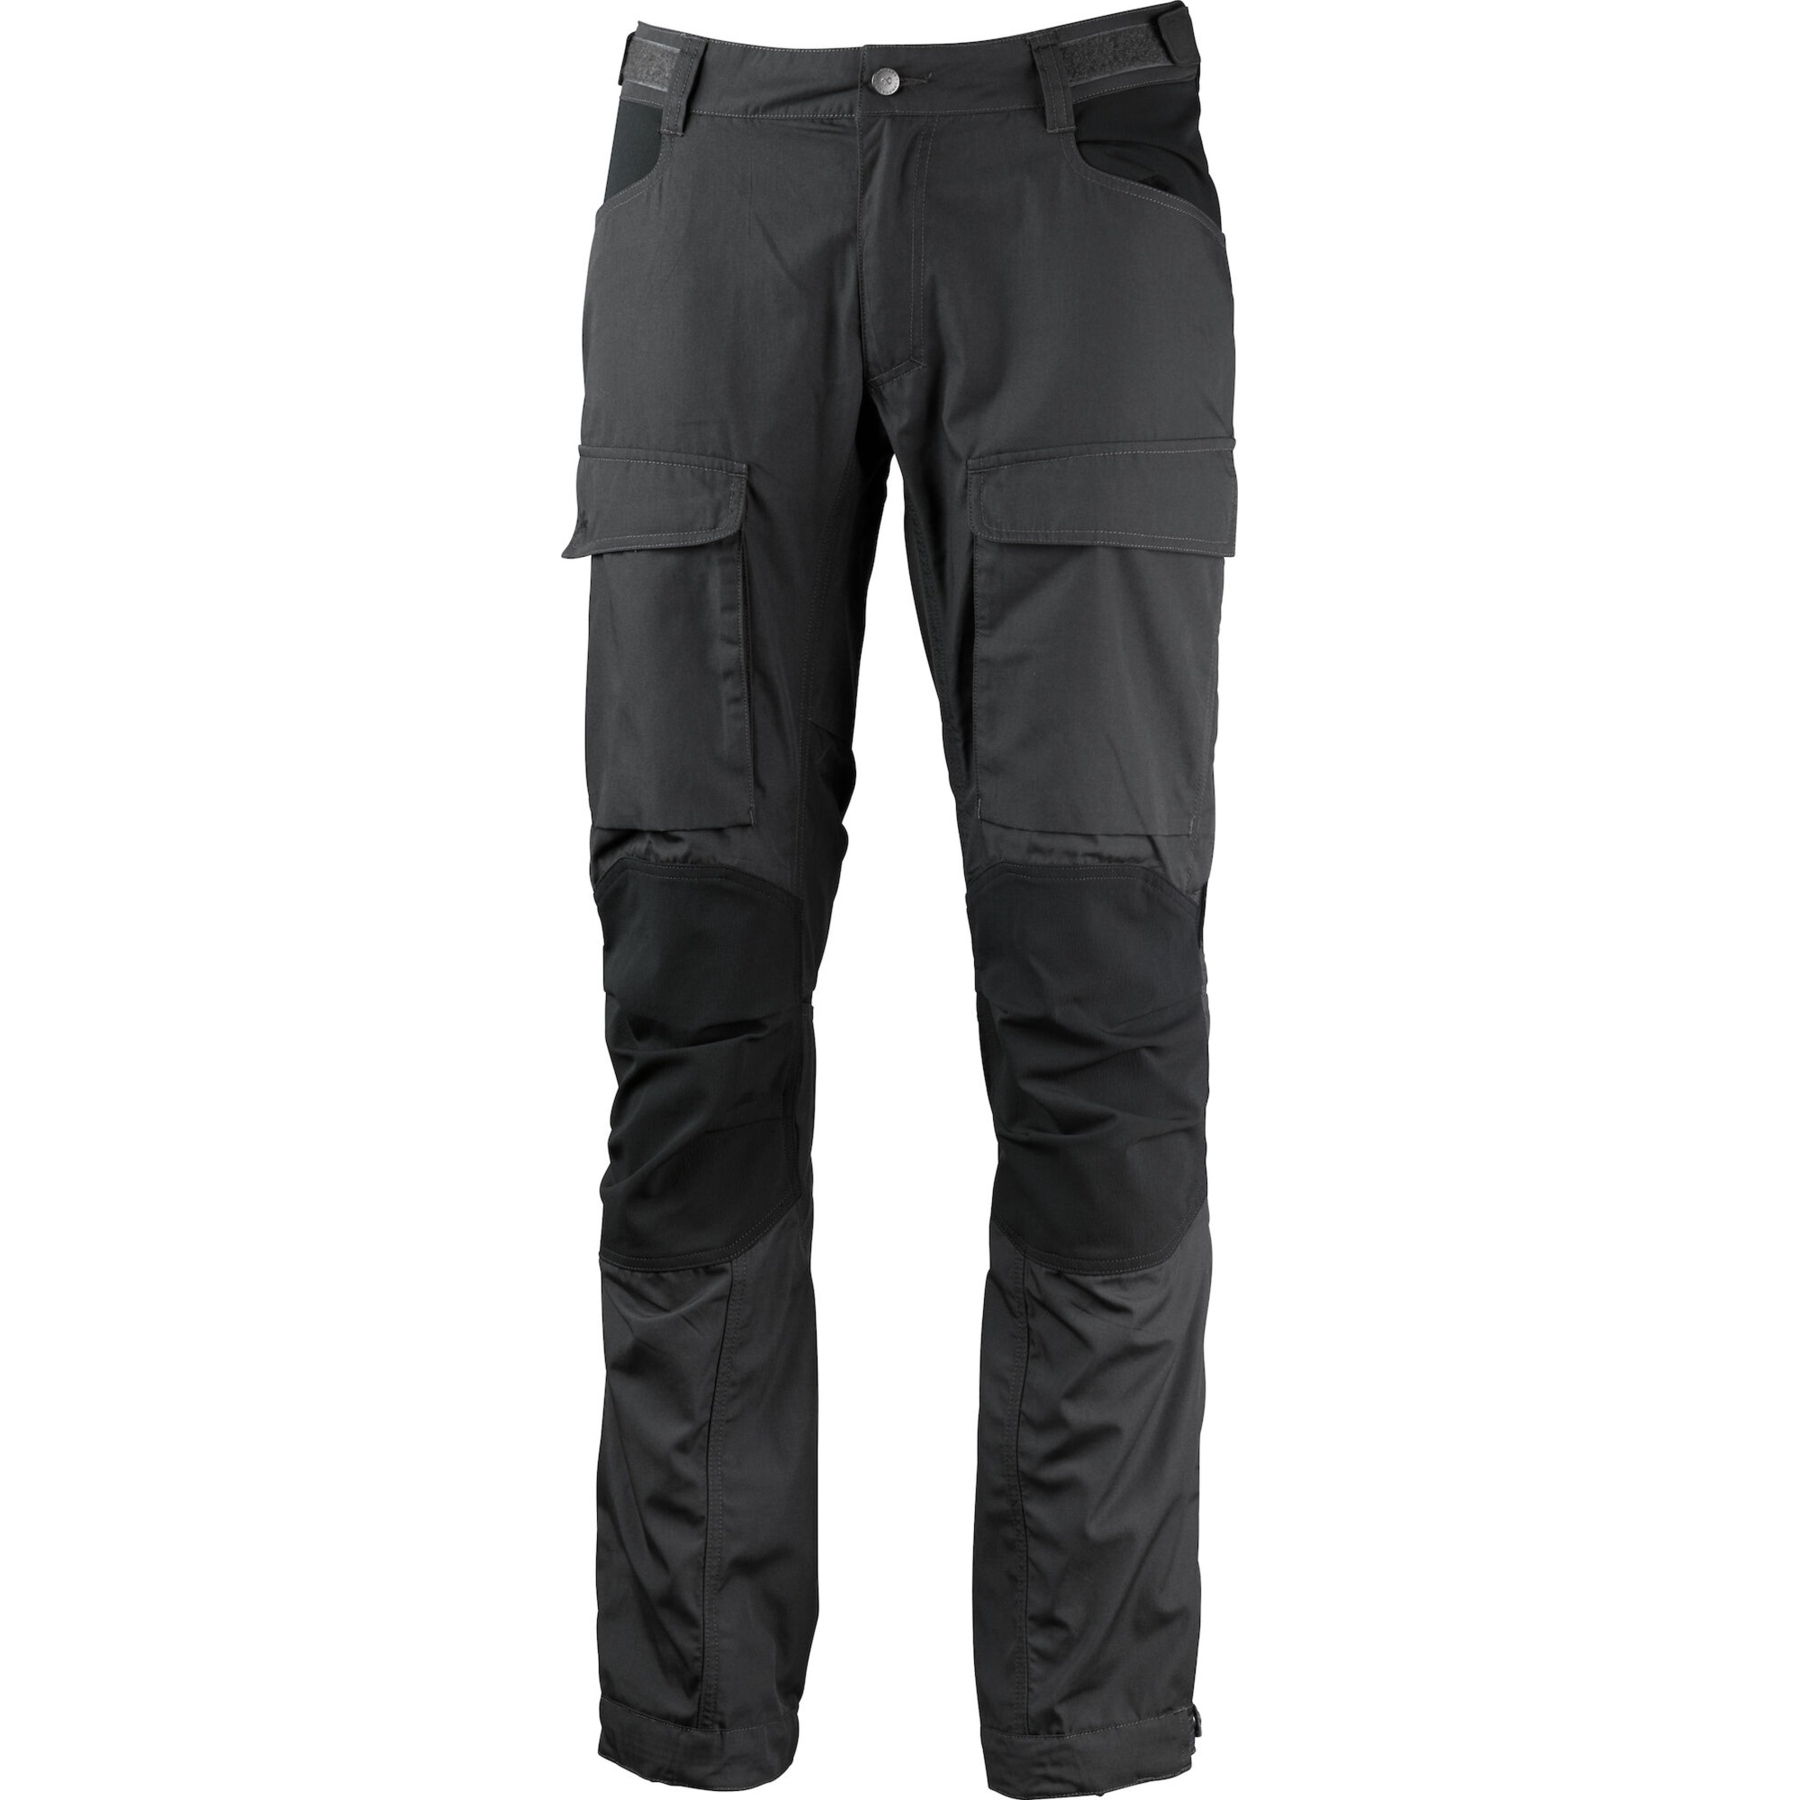 Picture of Lundhags Authentic II Hiking Pants Long - Granite/Charcoal 834